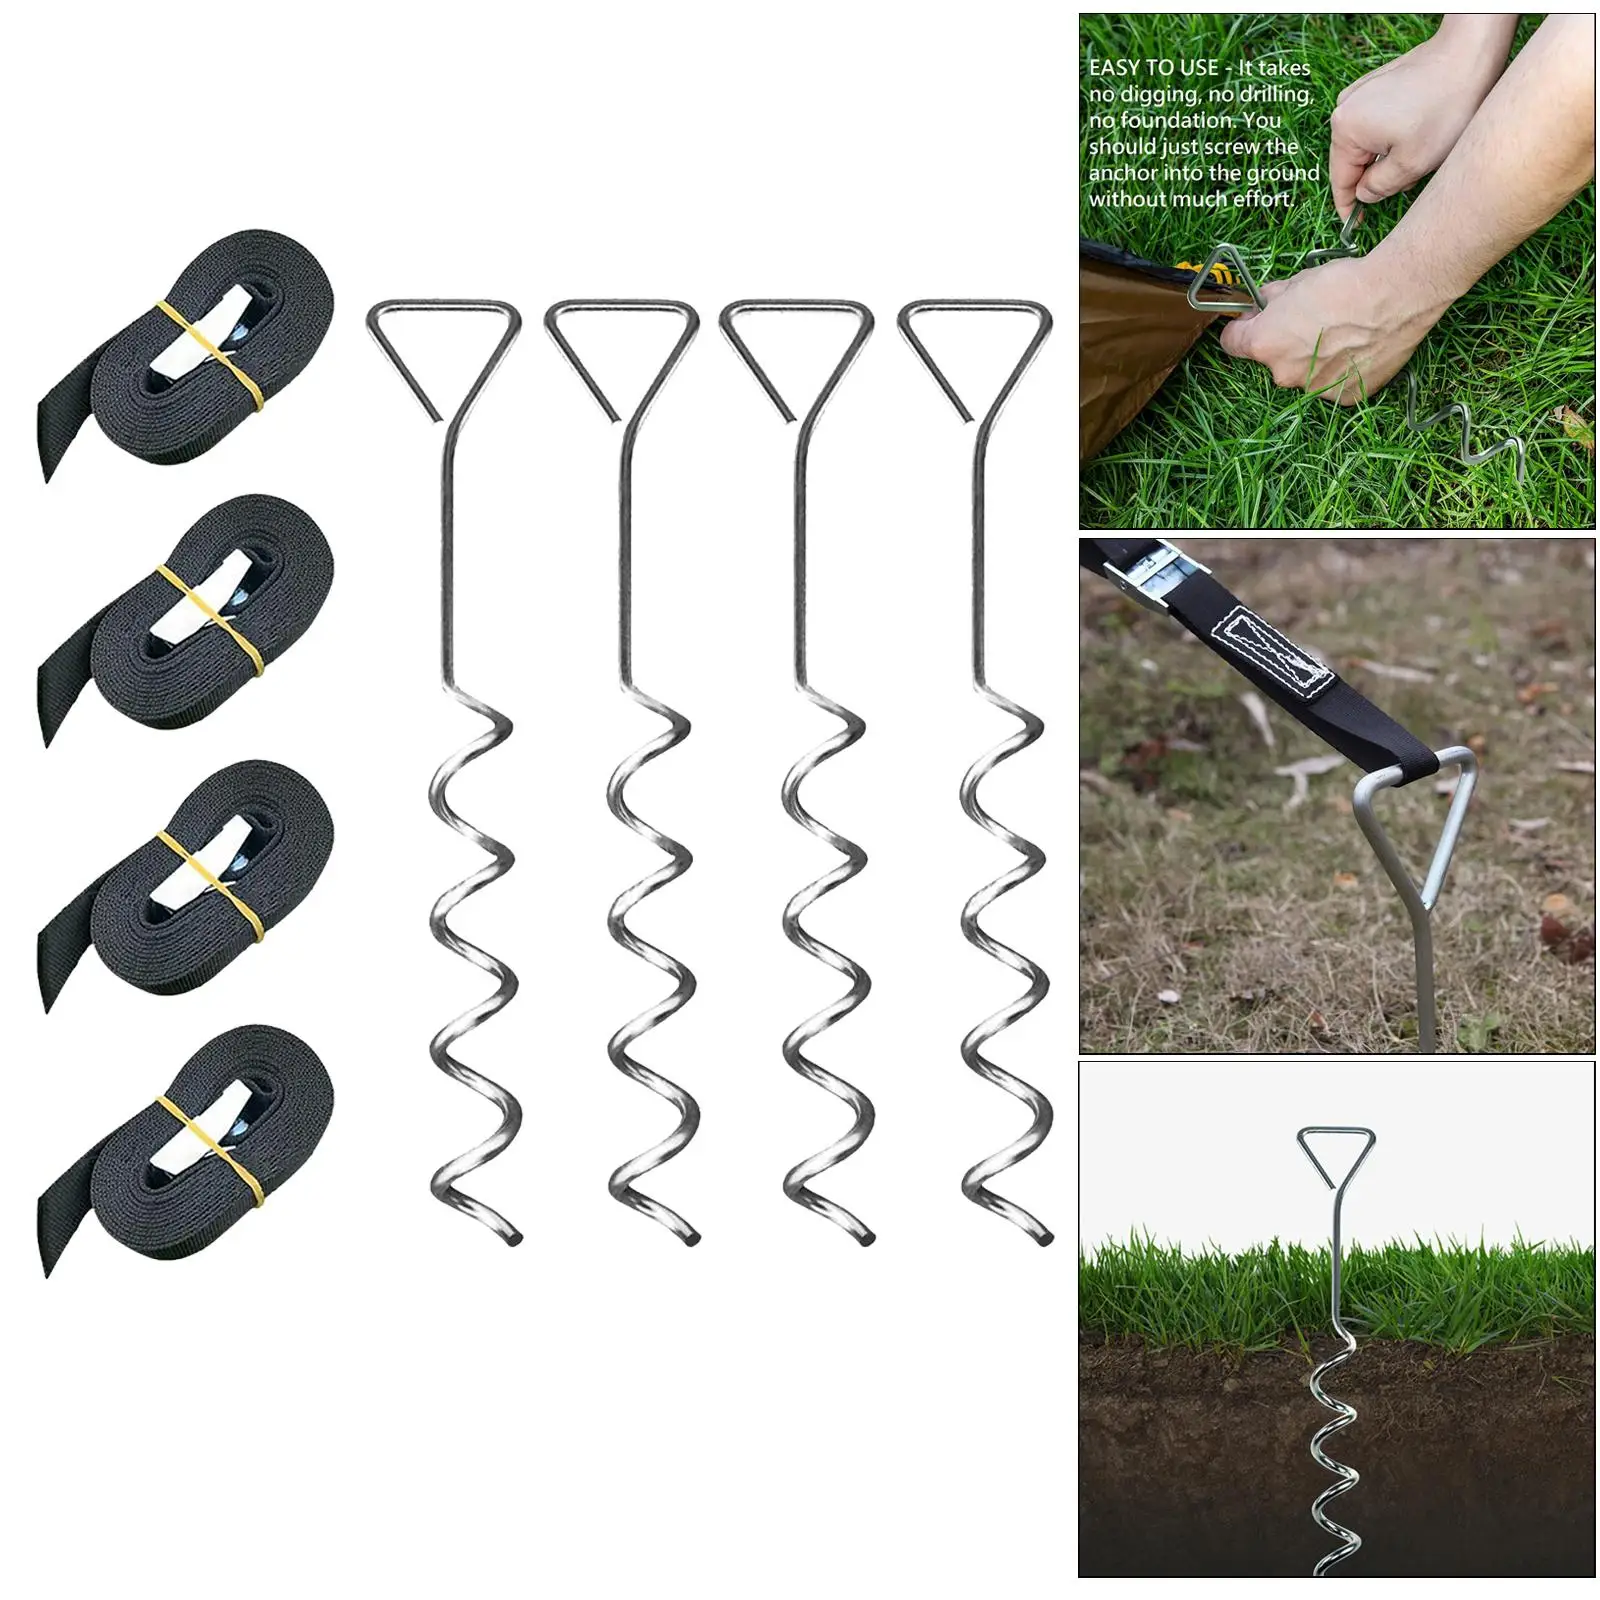 Heavy Duty Outdoor Tent Camping Ground Anchor Canopies Outdoor Camping